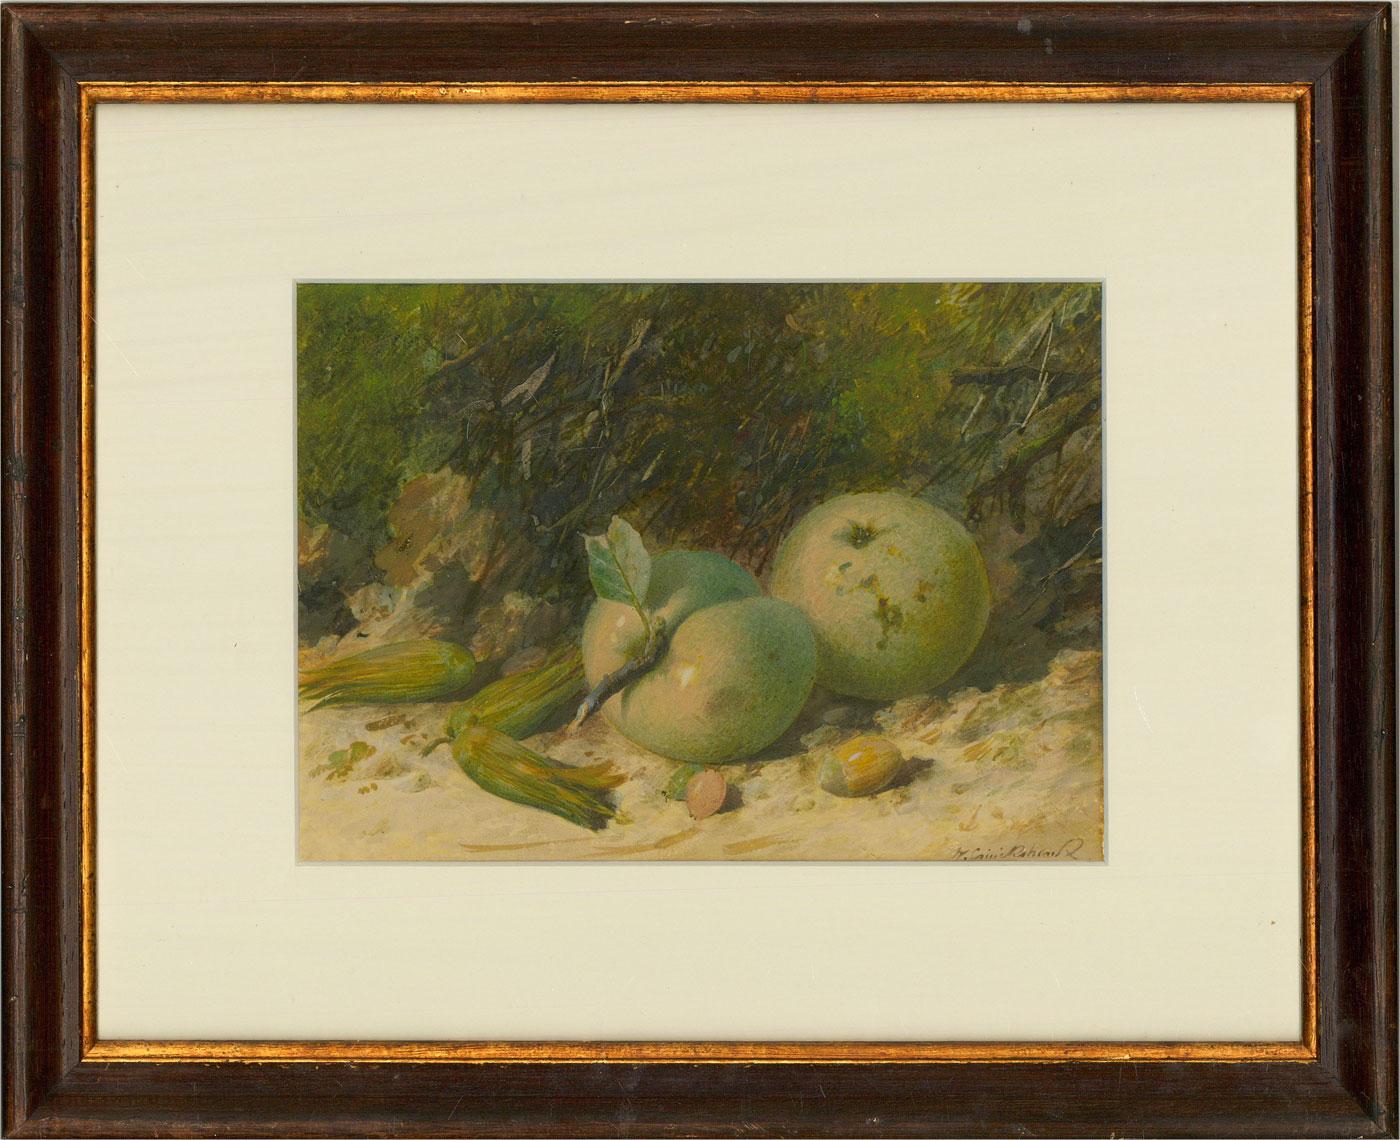 This well-executed watercolour still life depicts apples and nuts against a natural background. The artist has used delicate brushstrokes to convey the fine details of the fruit with a emphasis on light and tone. Signed to the lower right.